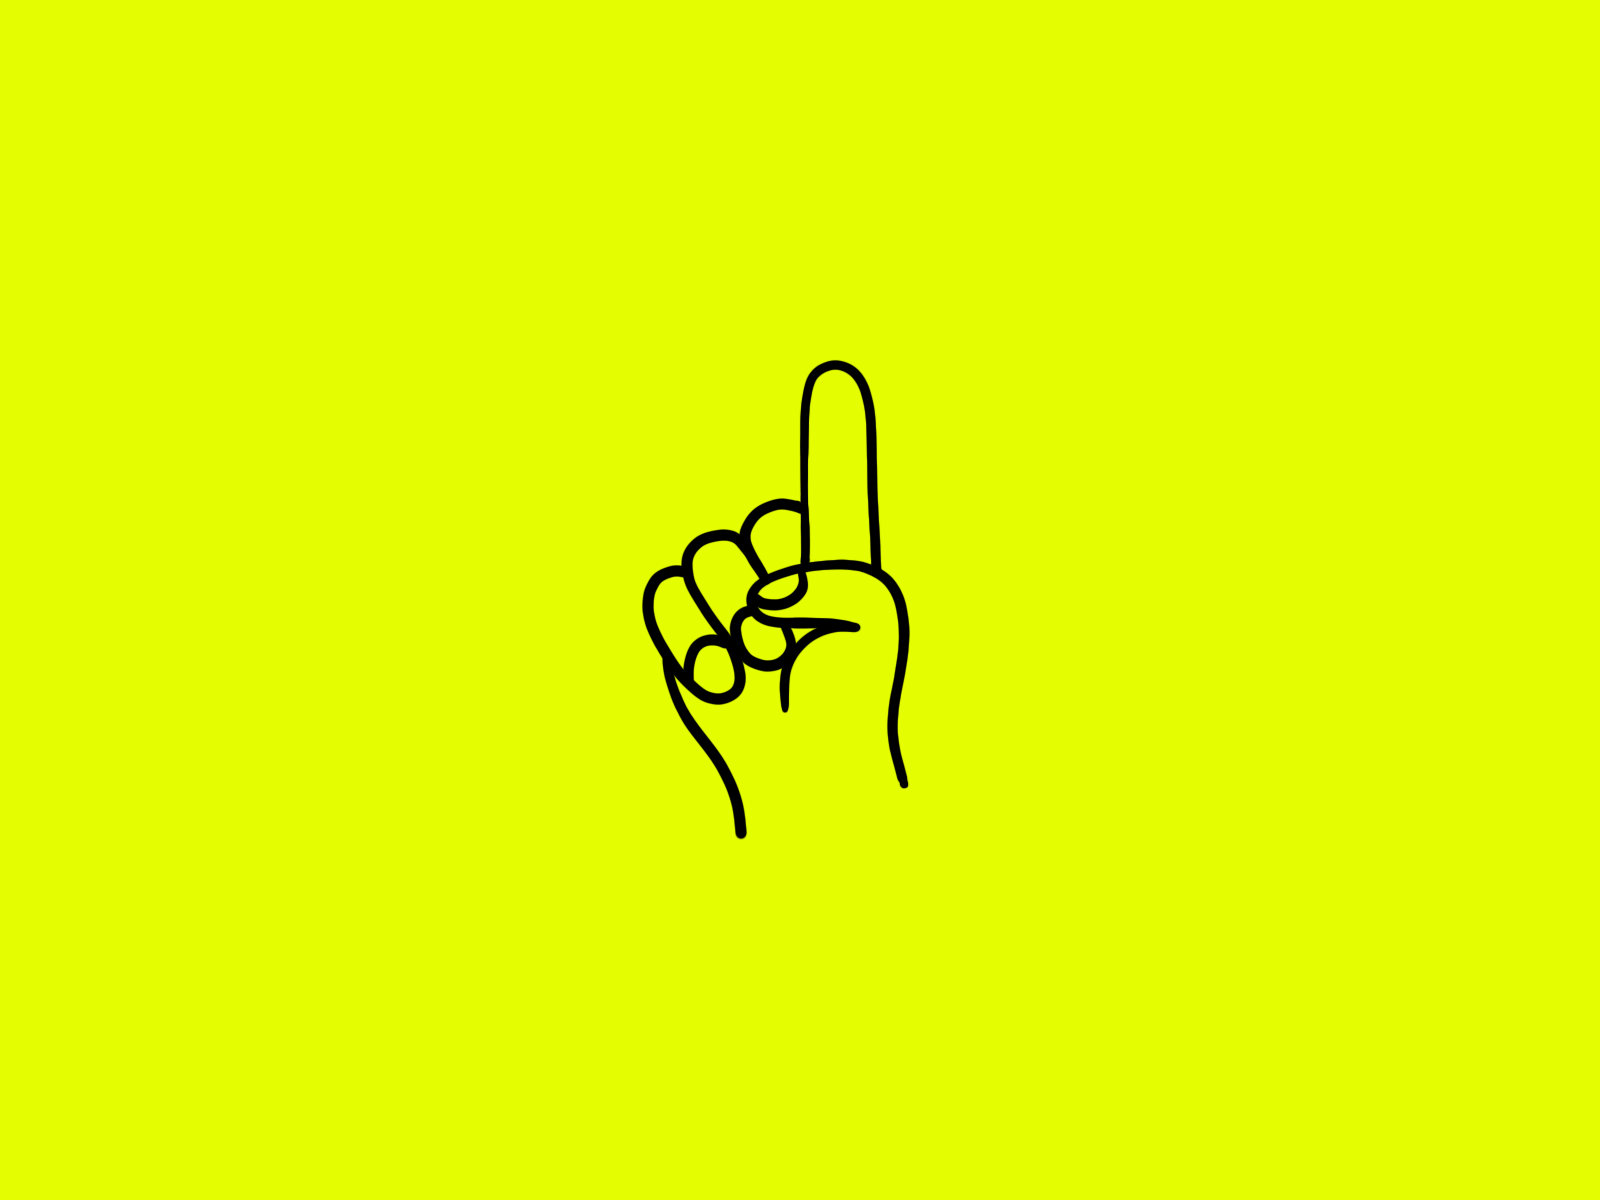 Counting fingers animation counting drawing fingers green hand human icon logoanimation motion graphics pinky